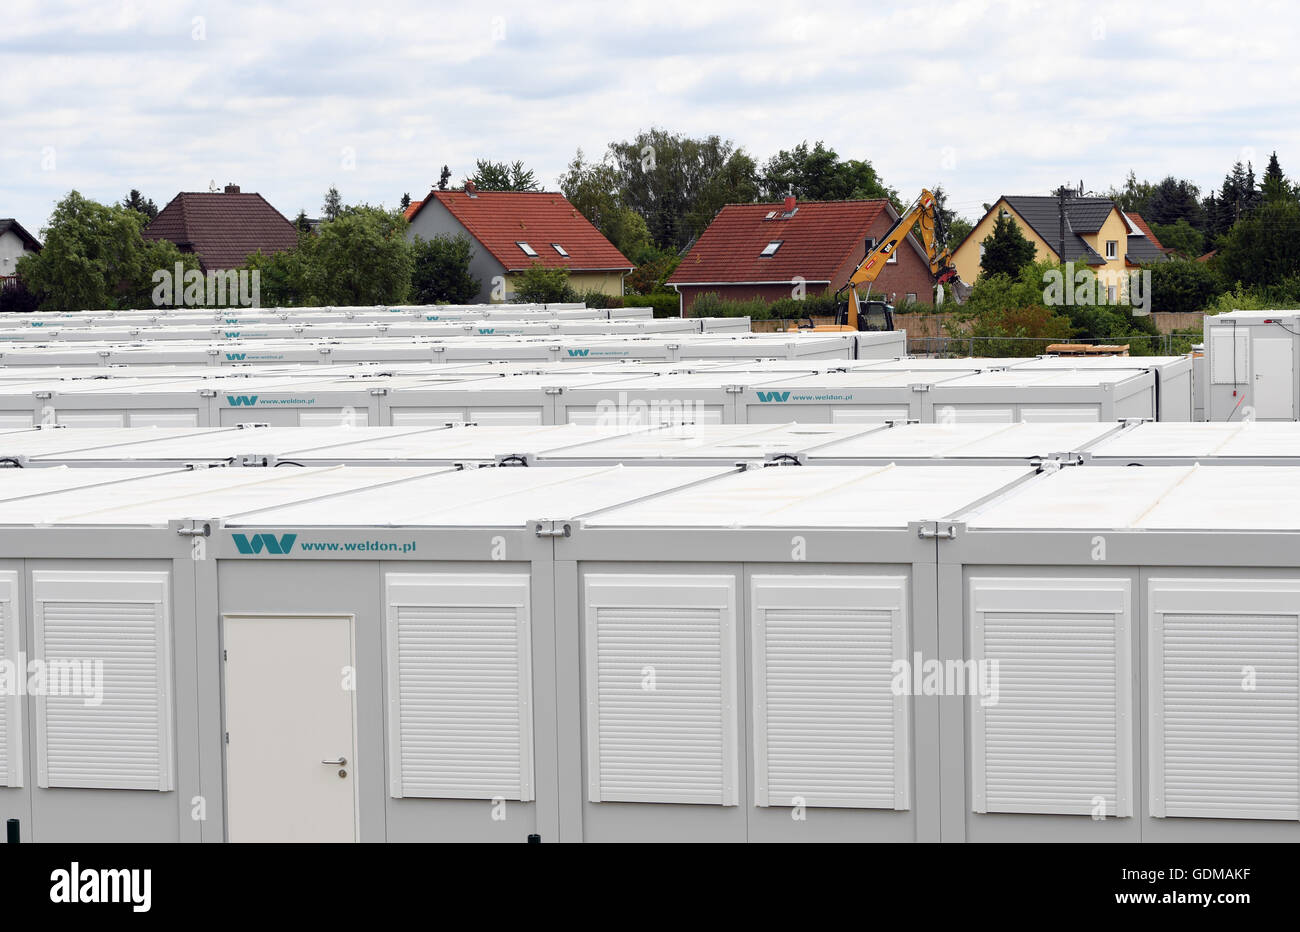 Berlin, Germany. 19th July, 2016. White containers can be seen between houses on Venus-Strasse (view from the roof of a resident) in Berlin, Germany, 19 July 2016. The administrative court has set an appointment for an on-site visit ahead of their decision on communal accommodations for refugees in Alt-Glienicke. Photo: SOEREN STACHE/dpa/Alamy Live News Stock Photo